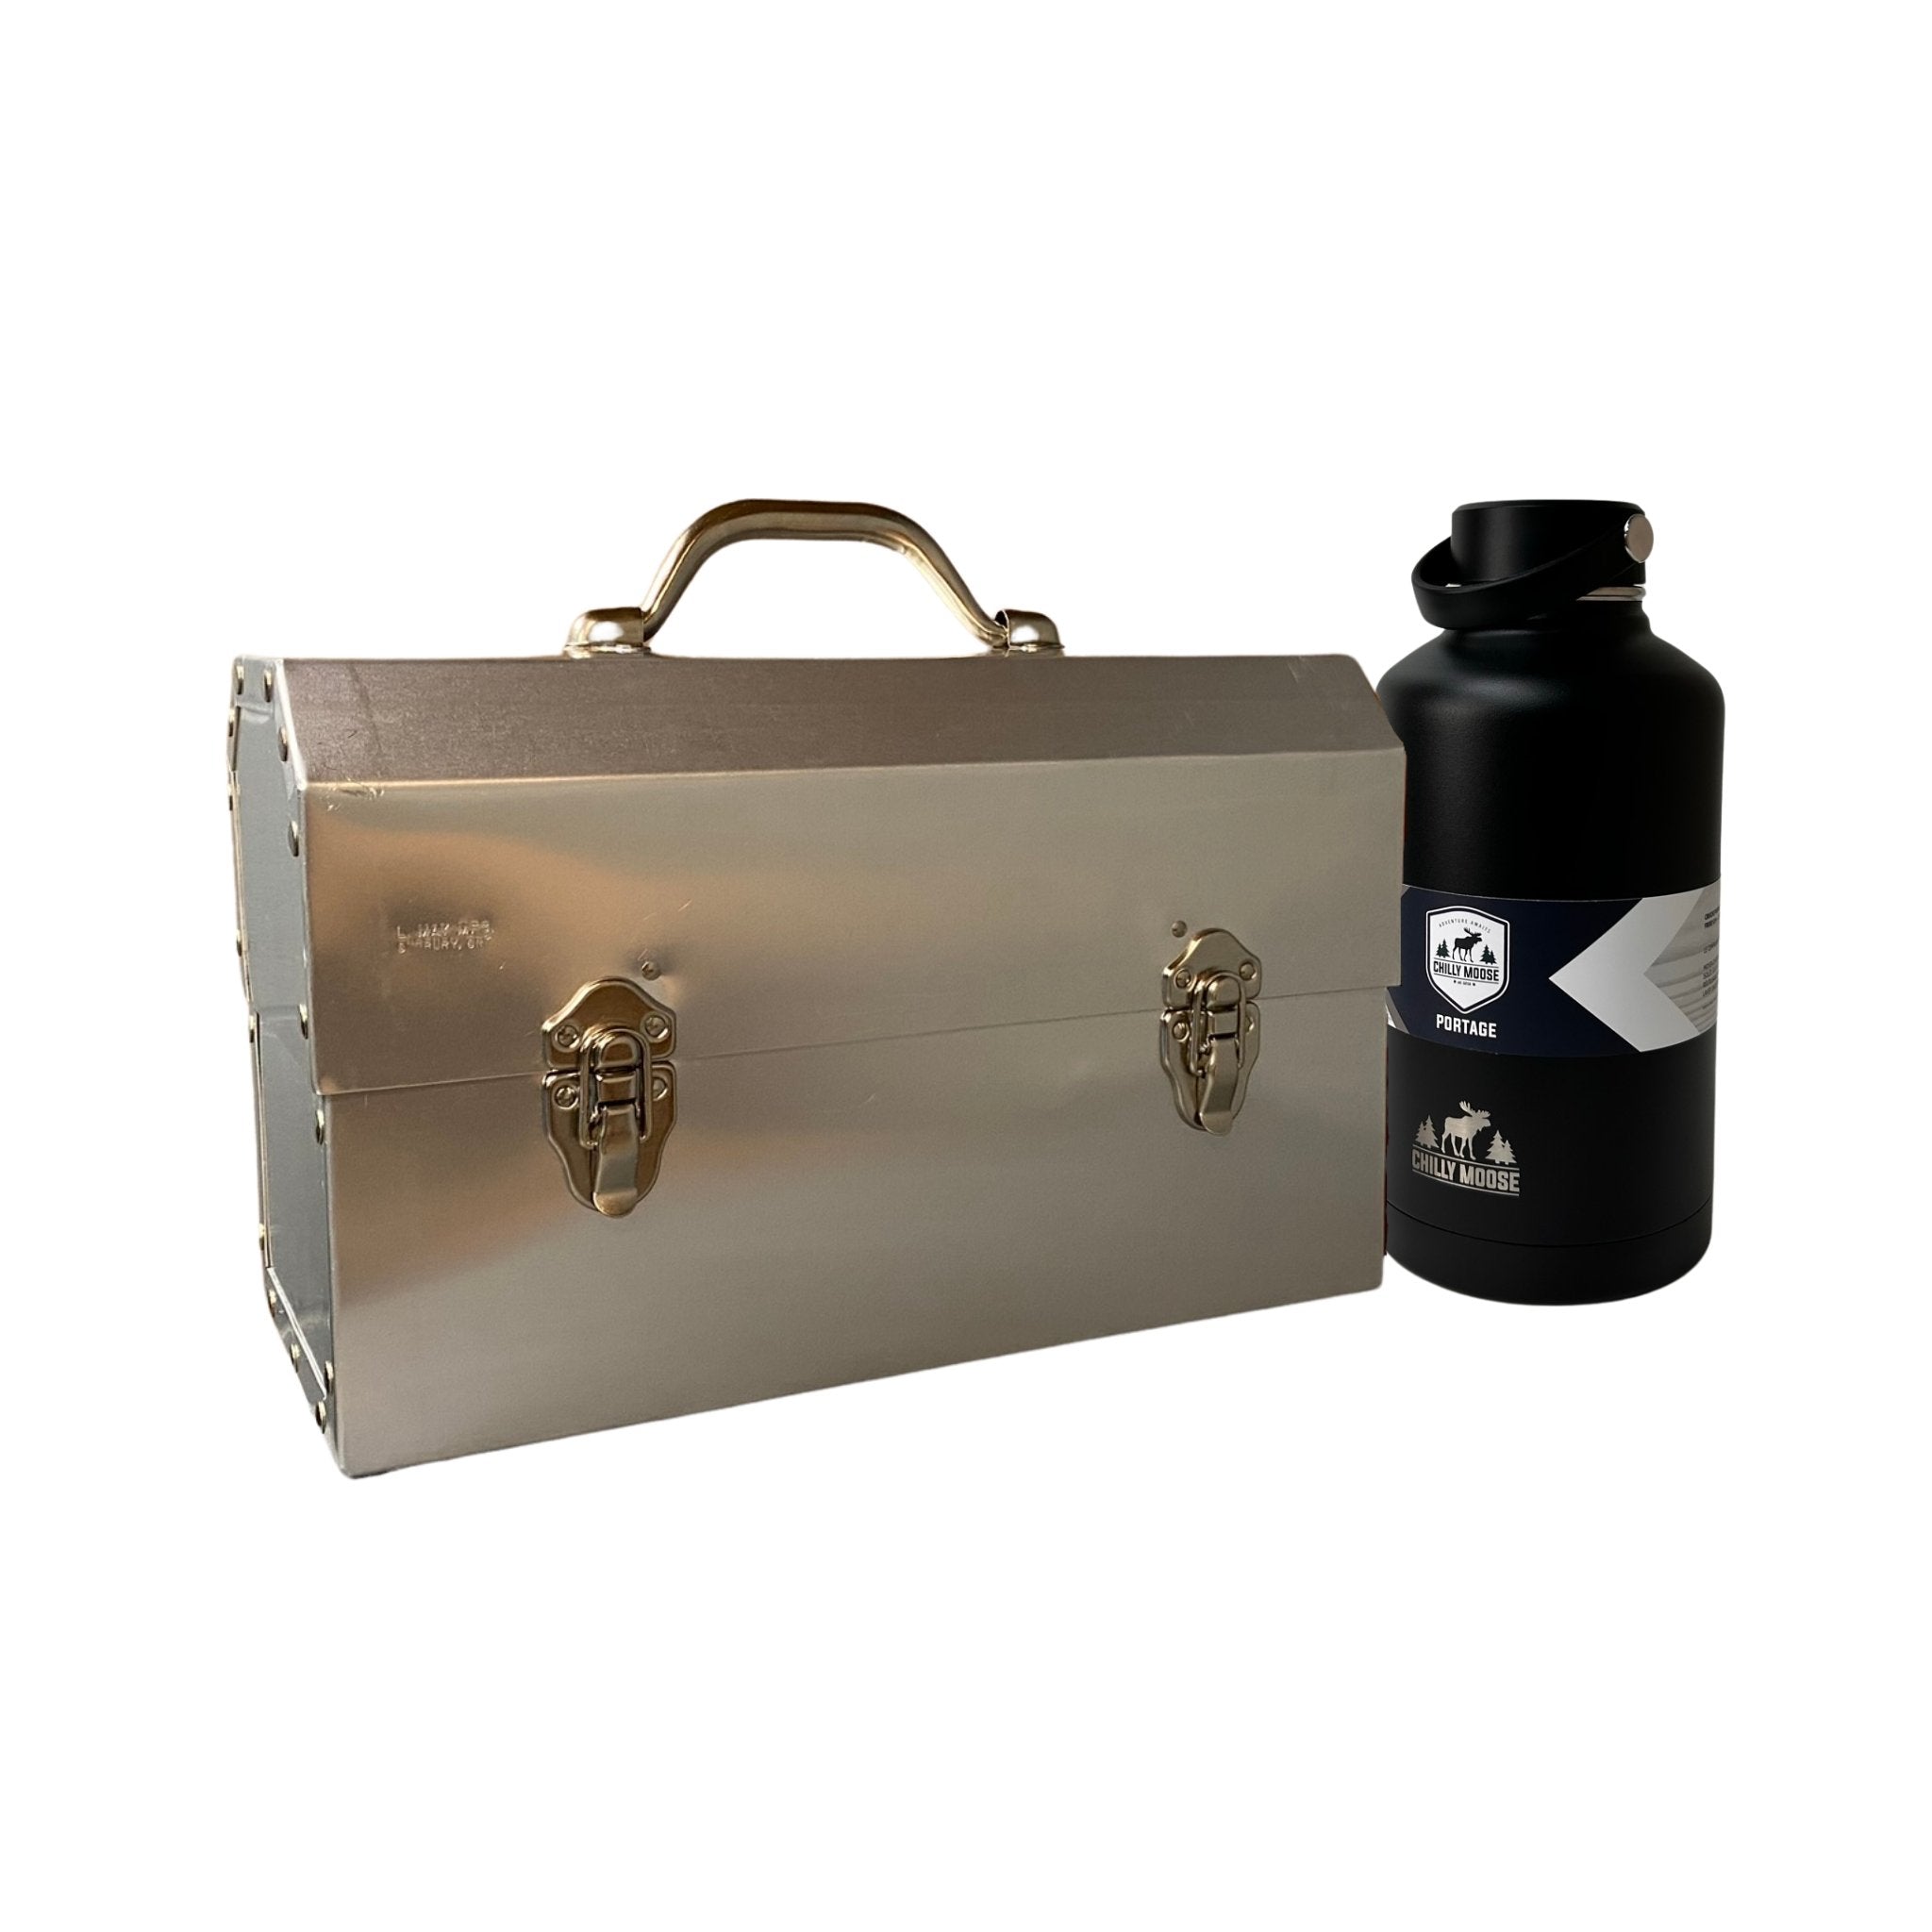 The Super Classic + 64oz Portage Canteen Black - The Miners LunchboxThe Miners Lunchbox